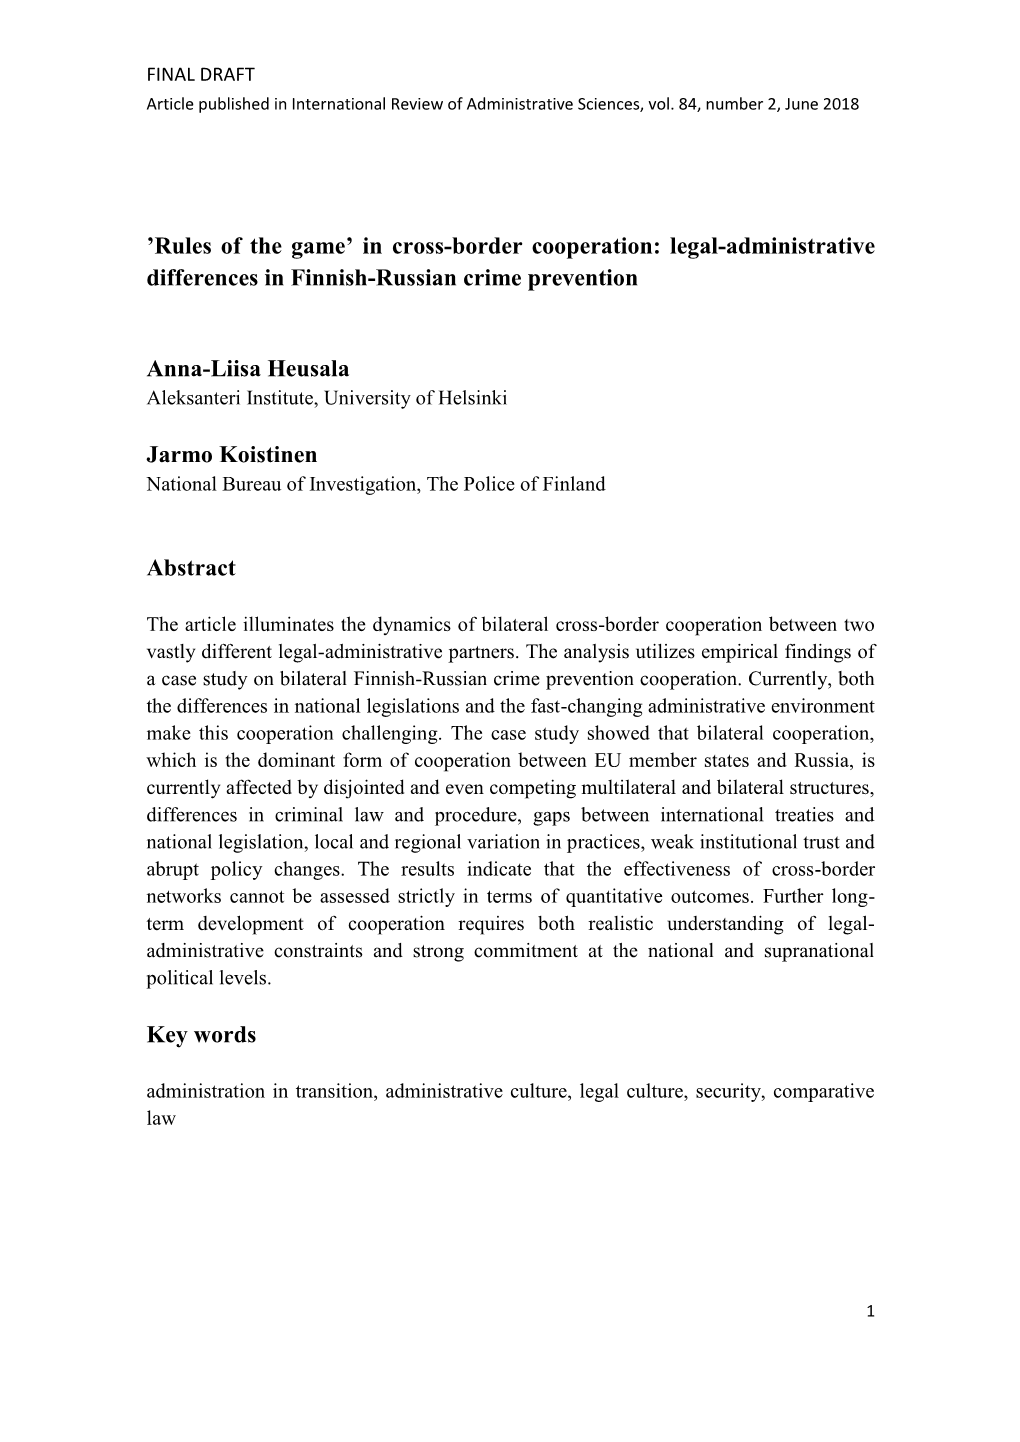 In Cross-Border Cooperation: Legal-Administrative Differences in Finnish-Russian Crime Prevention